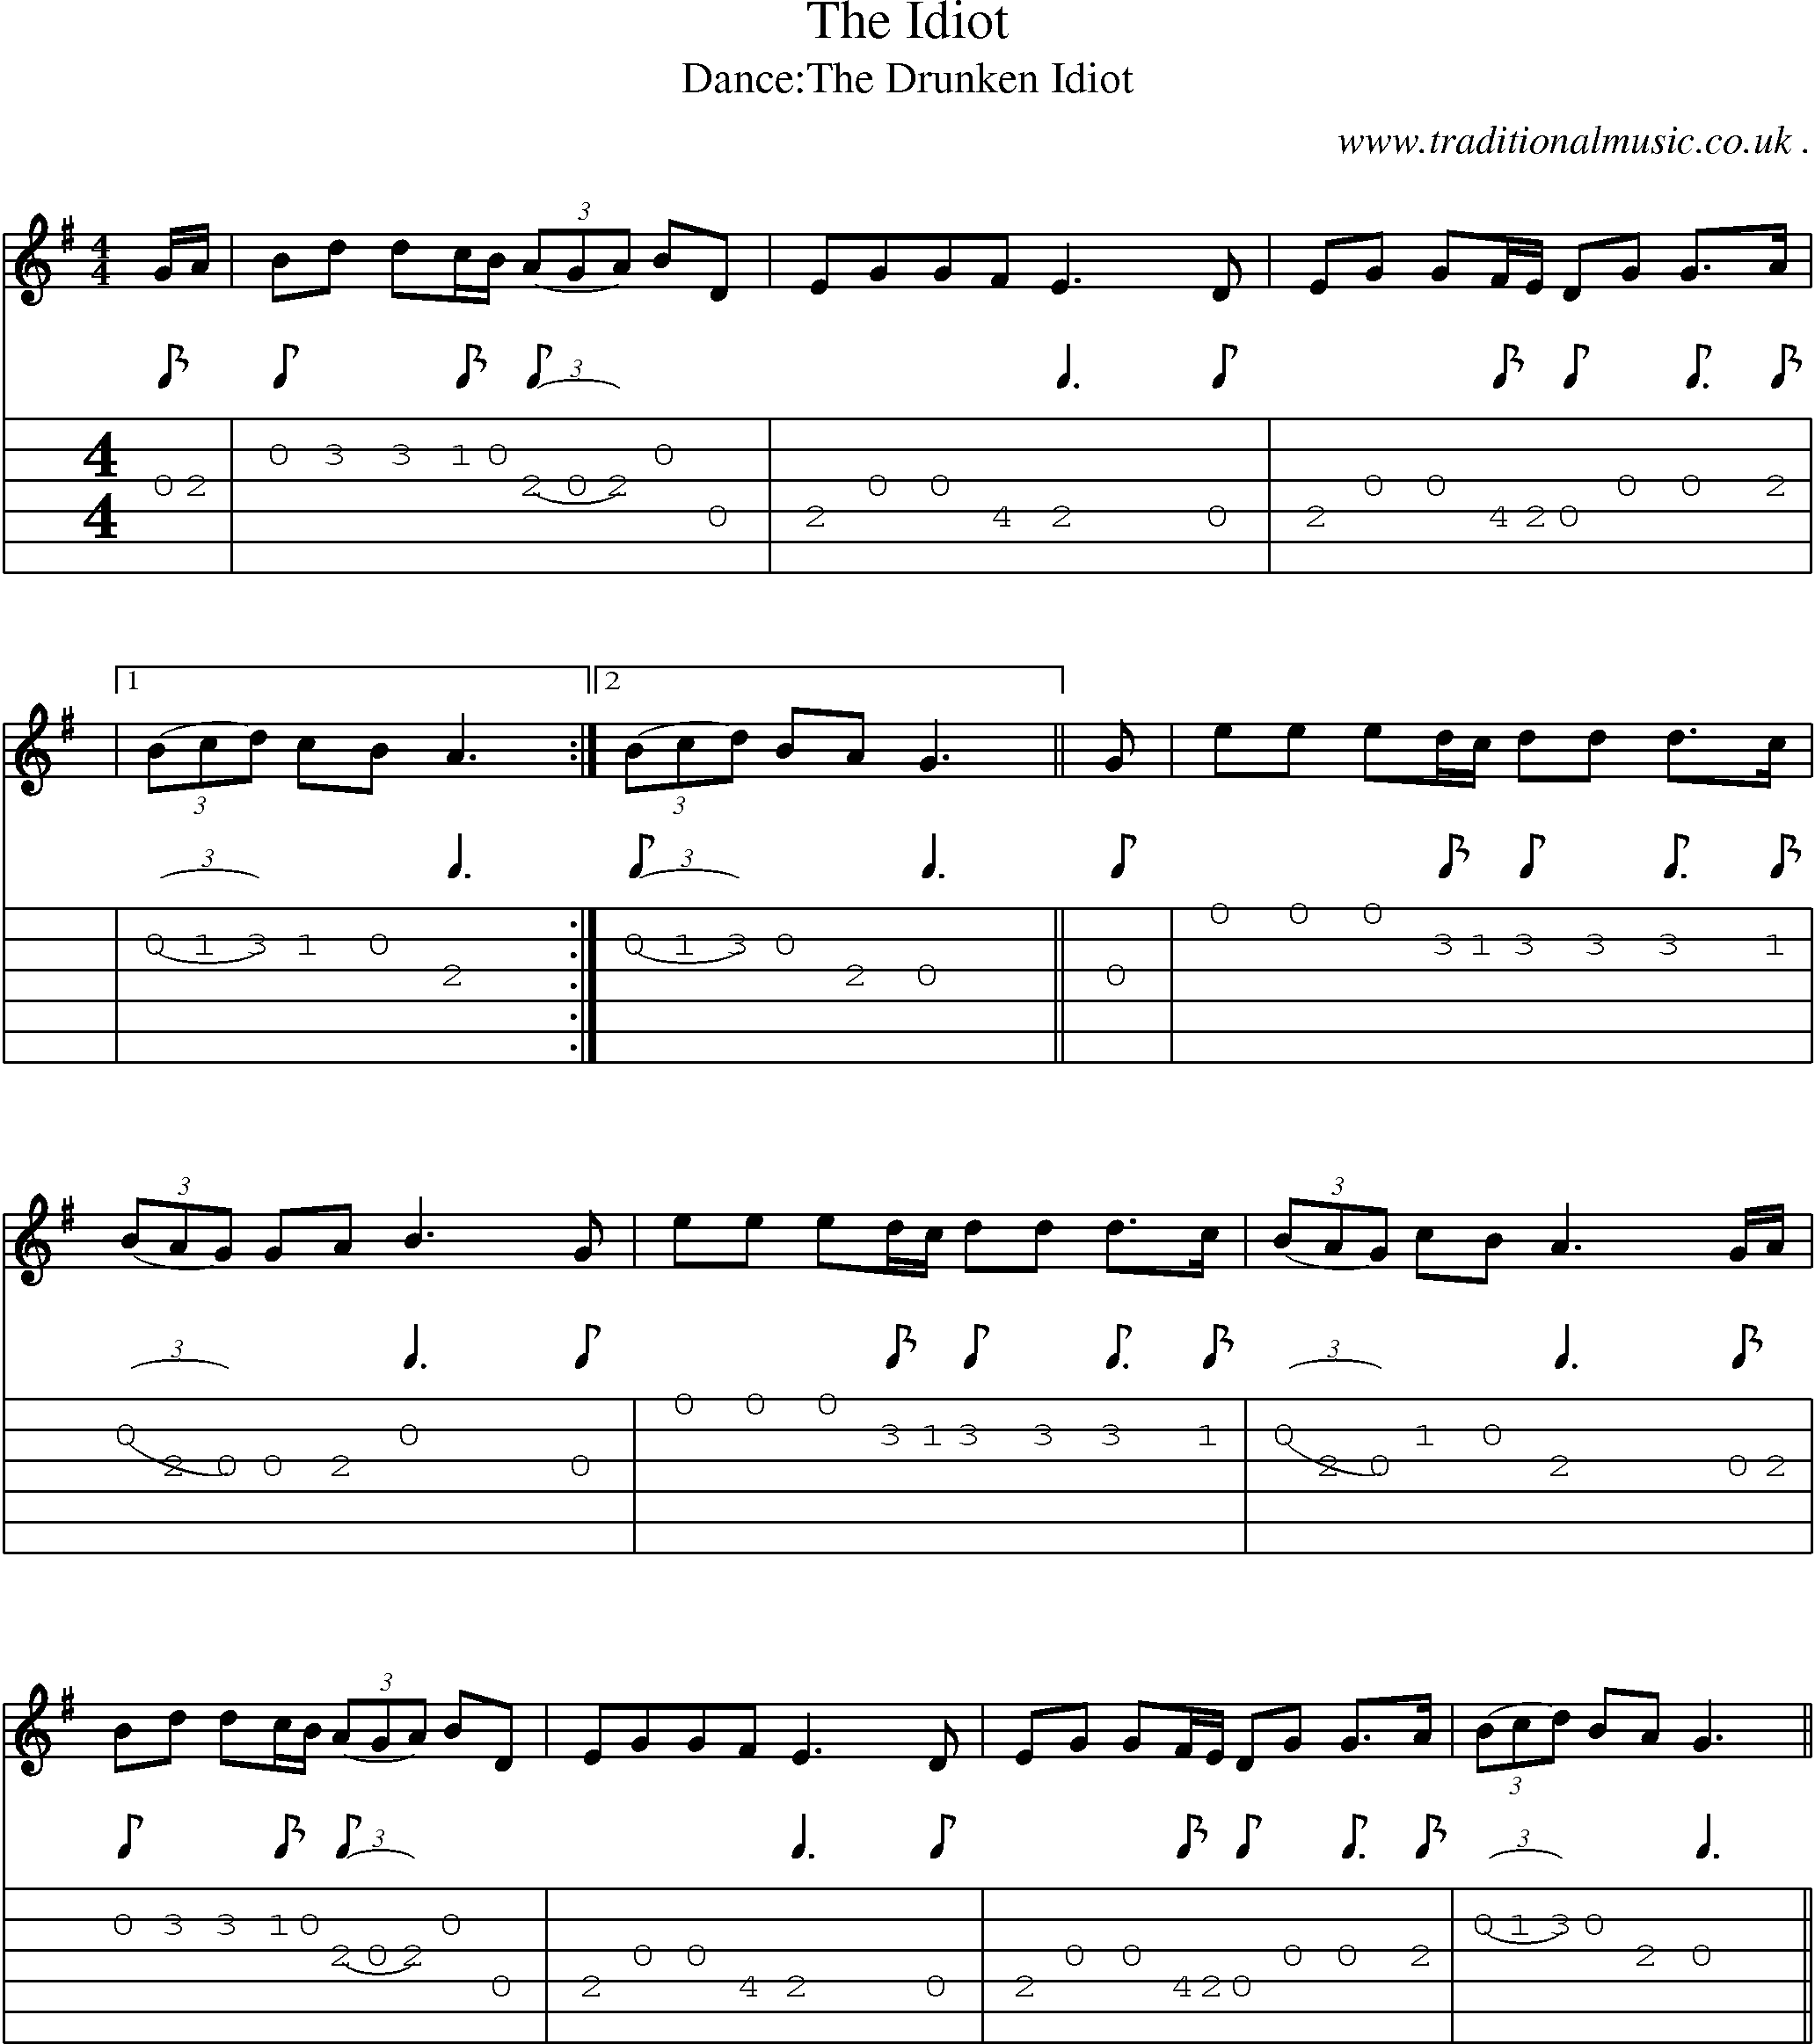 Sheet-Music and Guitar Tabs for The Idiot